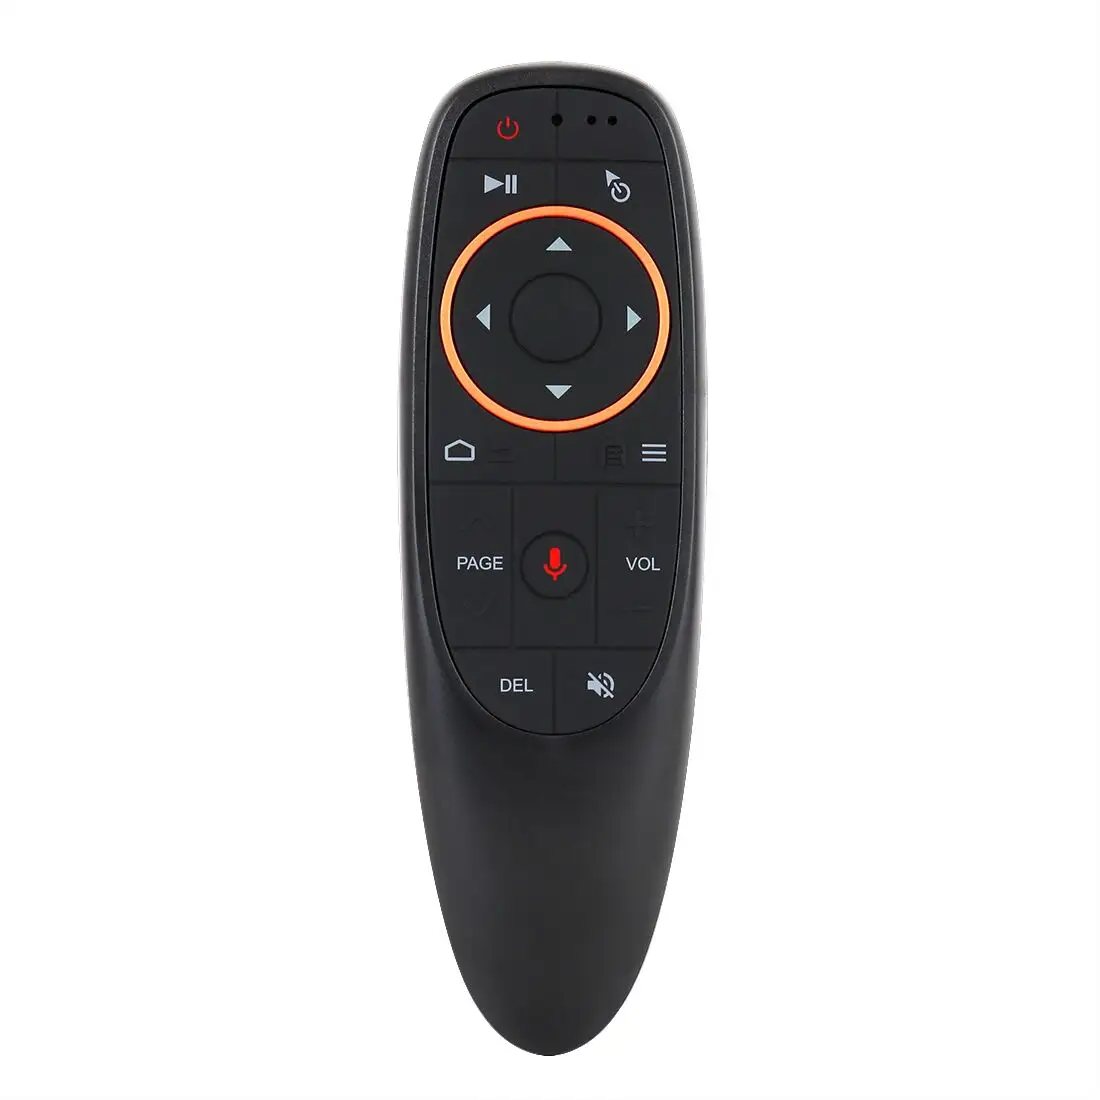 SYTA G10 G10S Remote Control Axis Gyroscope IR dengan USB 2.4GHz Wireless Air Mouse untuk Android Tv Box